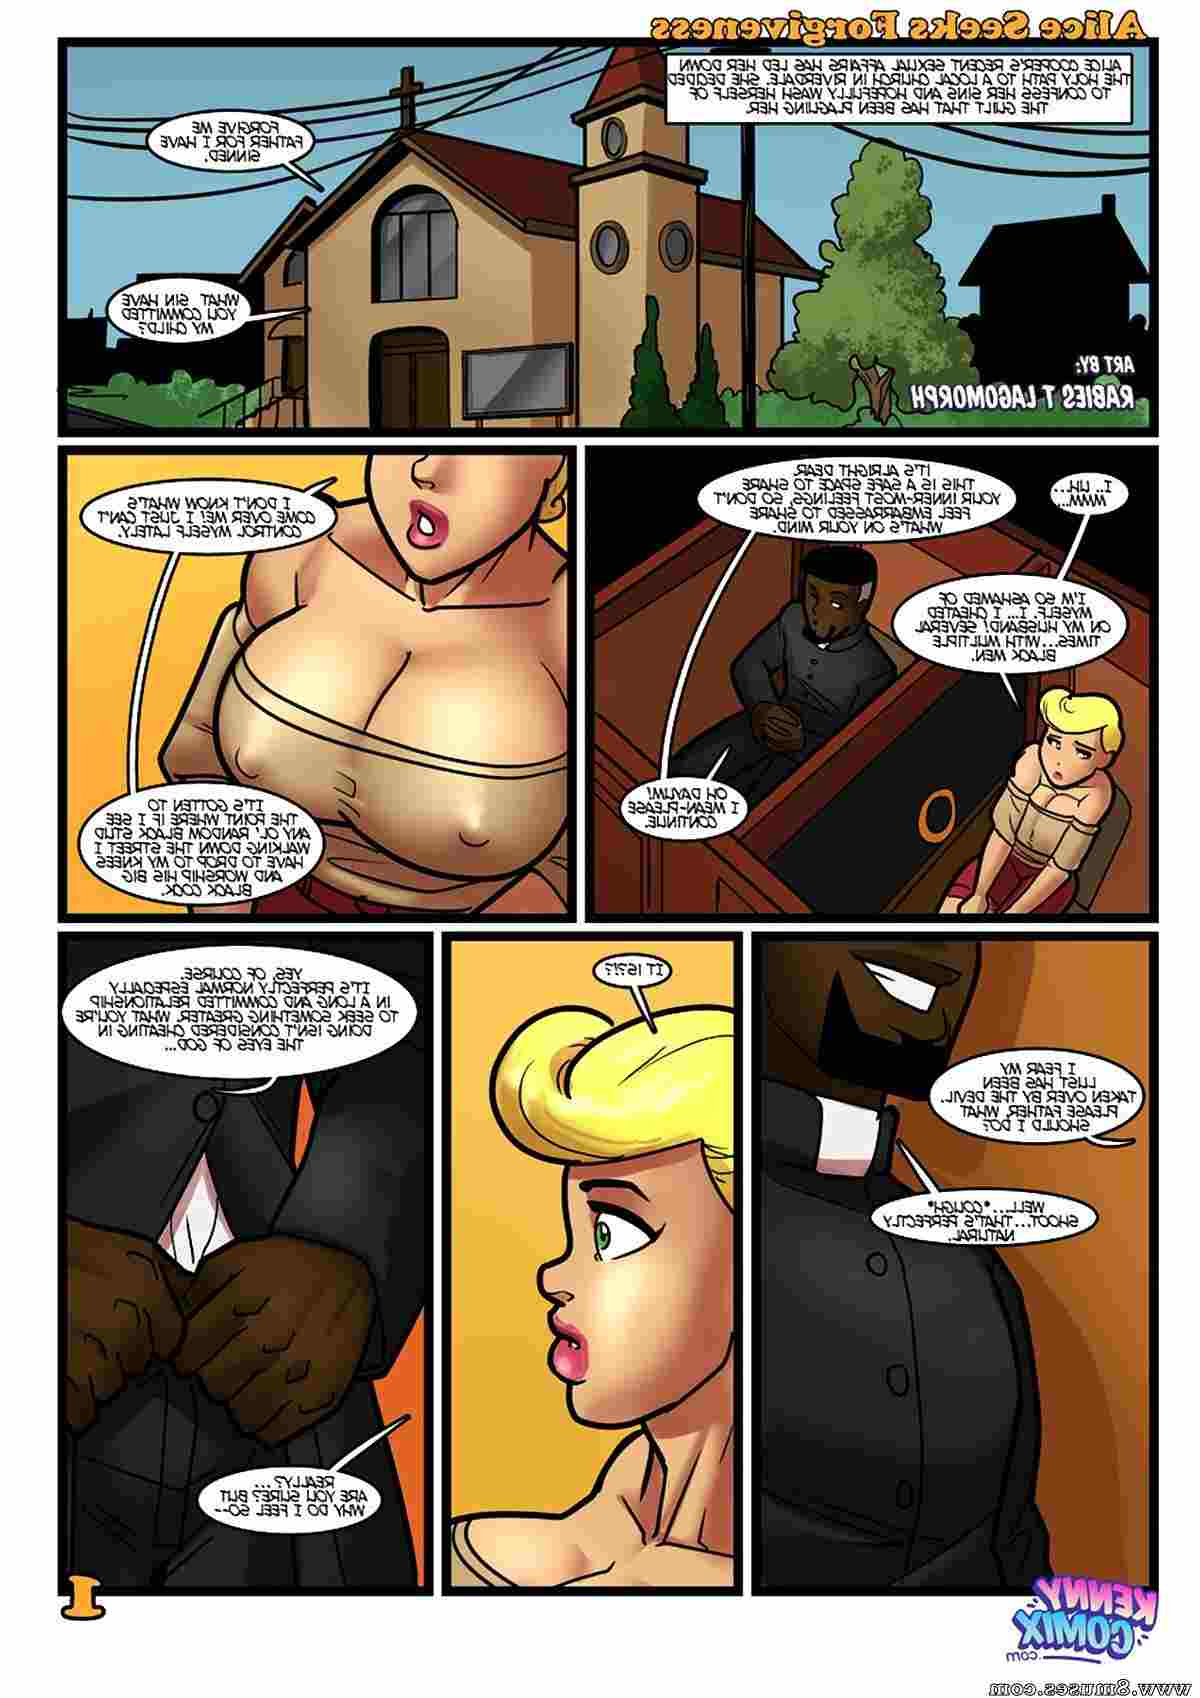 Various-Authors/KennyComix KennyComix__8muses_-_Sex_and_Porn_Comics.jpg